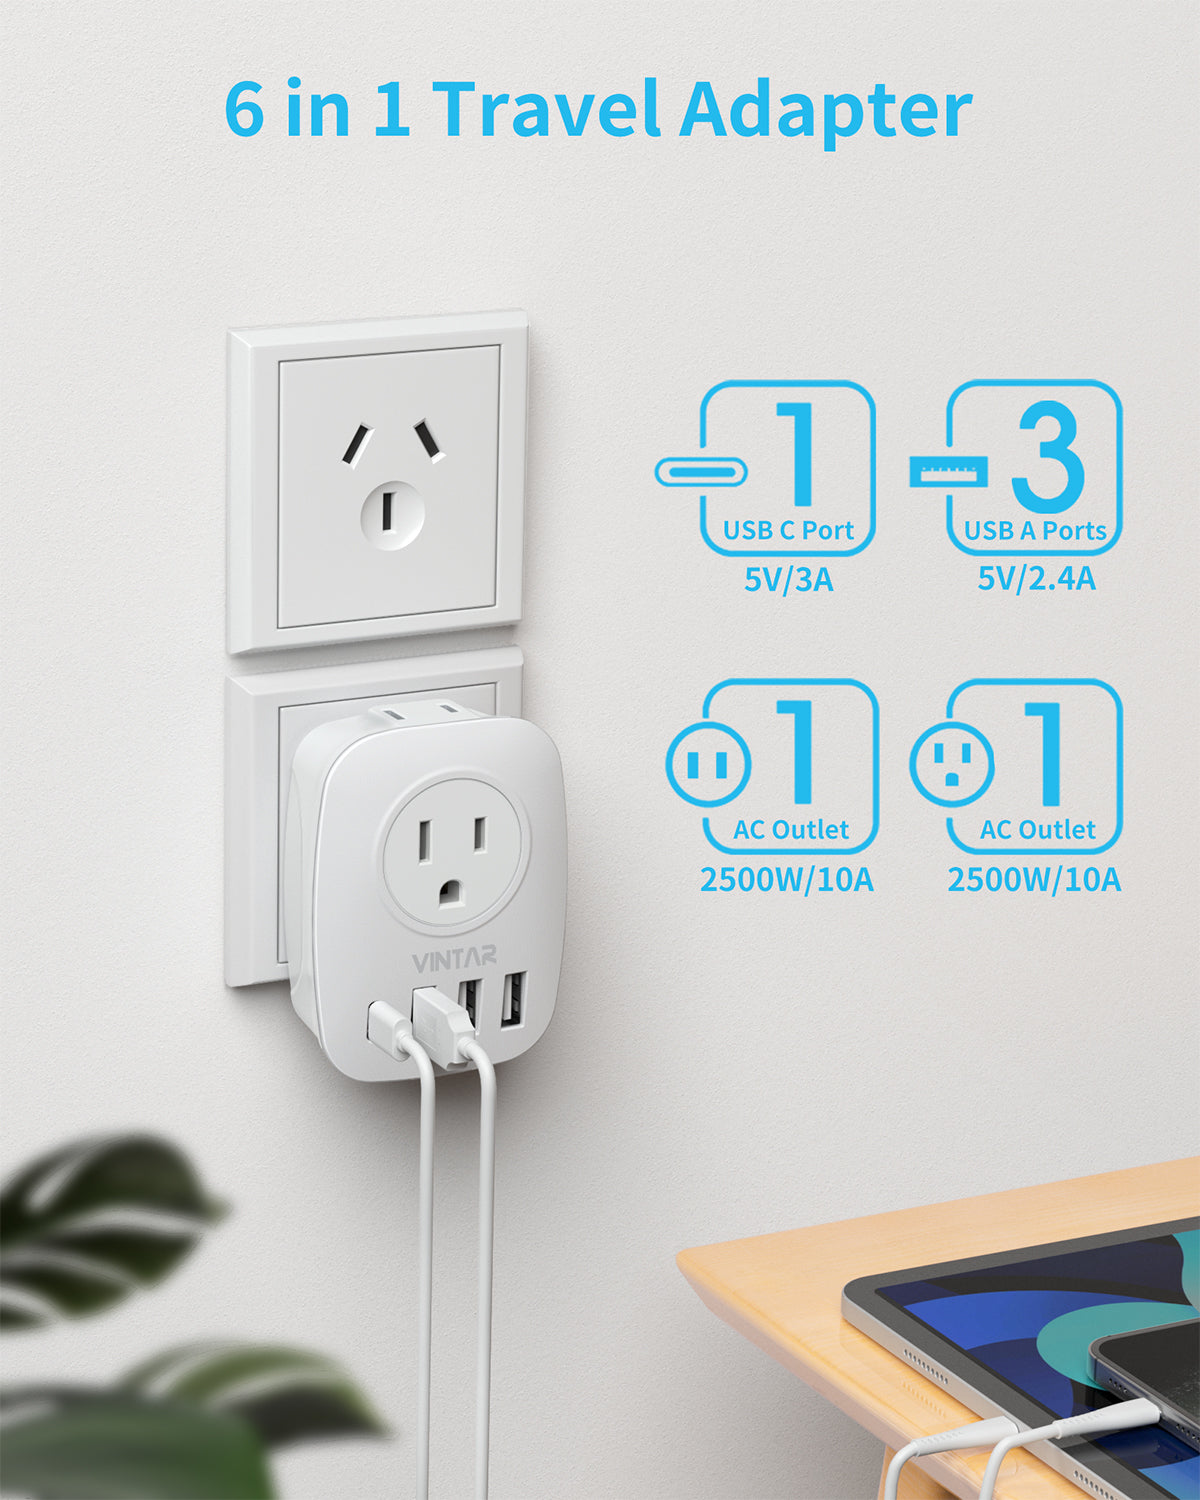 [2-Pack] Australia New Zealand Power Plug Adapter, VINTAR Australia Travel Adapter with 1 USB C,3 USB Ports and 2 American Outlets, 6 in 1 Type I Plug Adapter for US to Australia, China, Argentina